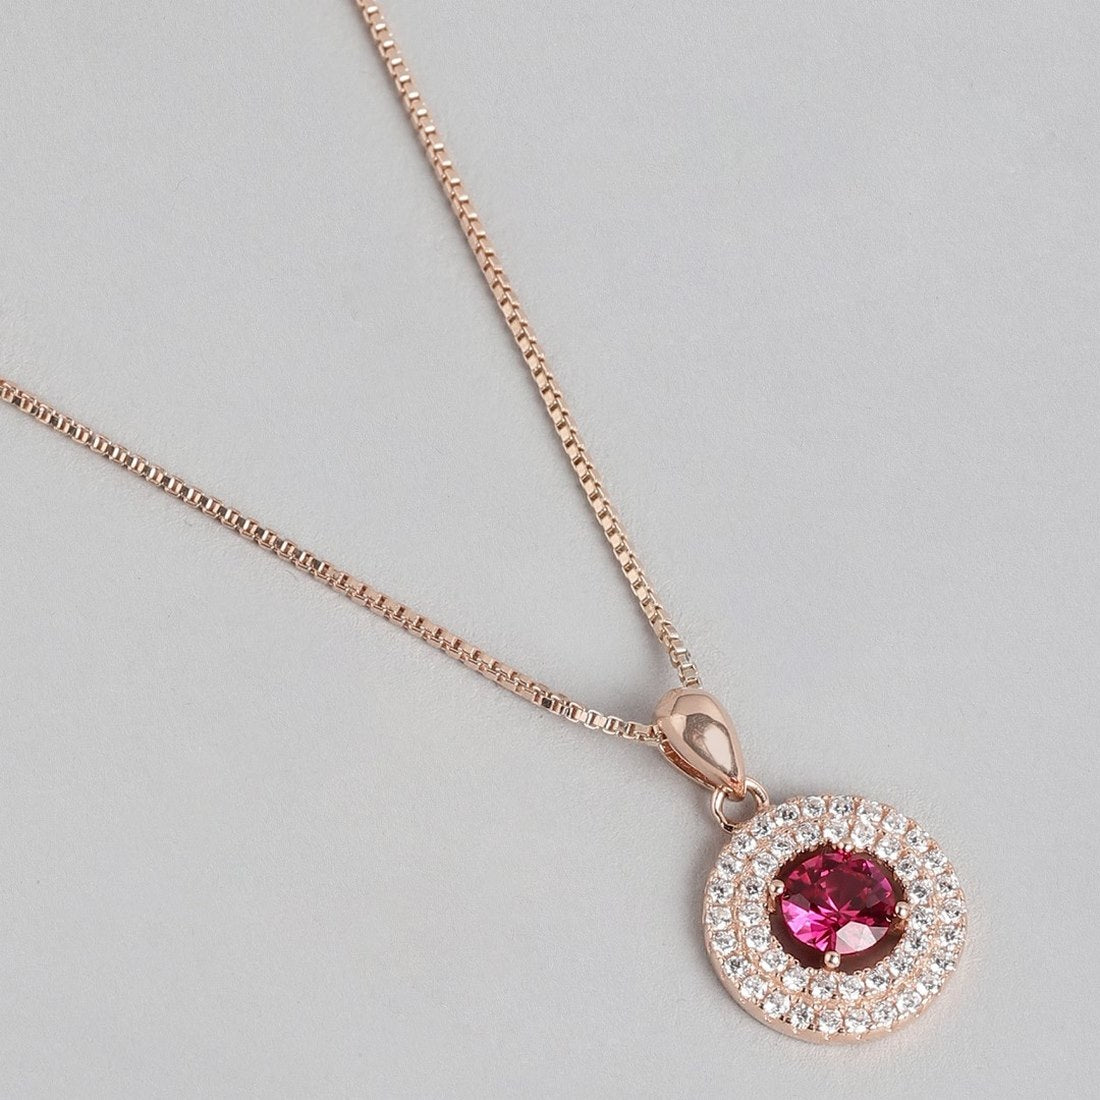 Crimson Radiance Rose Gold-Plated Circle Pendant 925 Sterling Silver Pendant with Chain